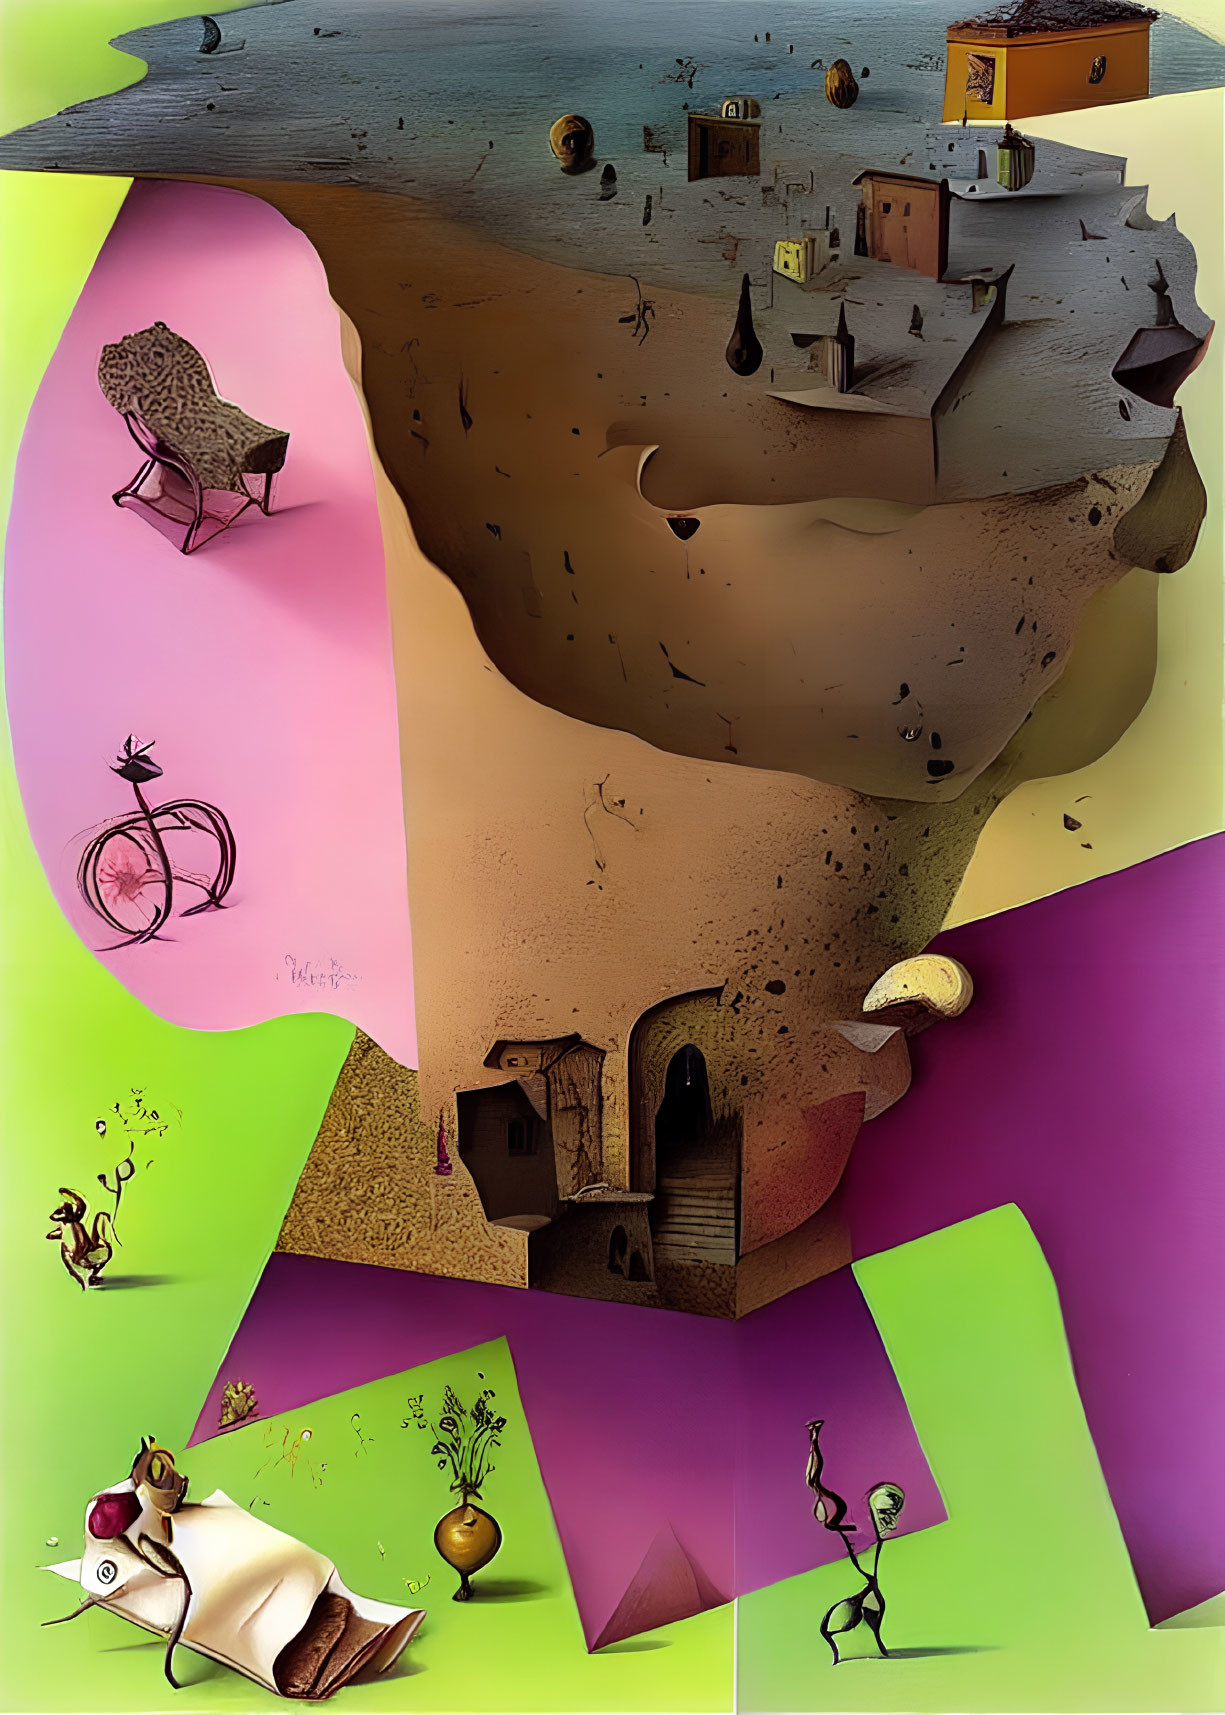 Surreal Artwork: Face-shaped landscape, melting objects, vivid colors, and gravity-defying